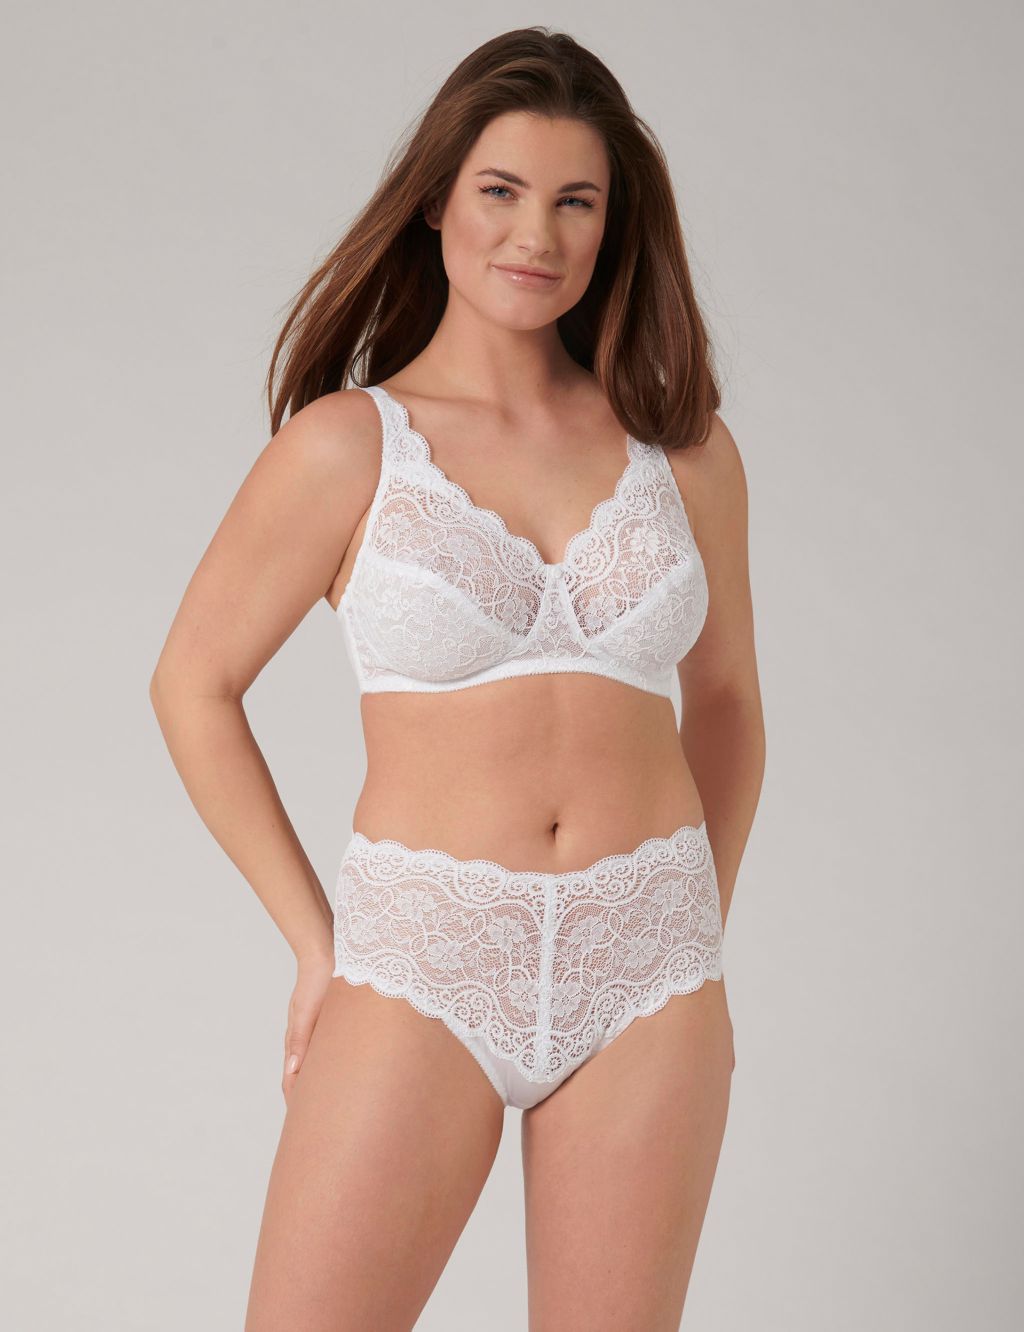 Amourette 300 Lace Non Wired Full Cup Bra image 3